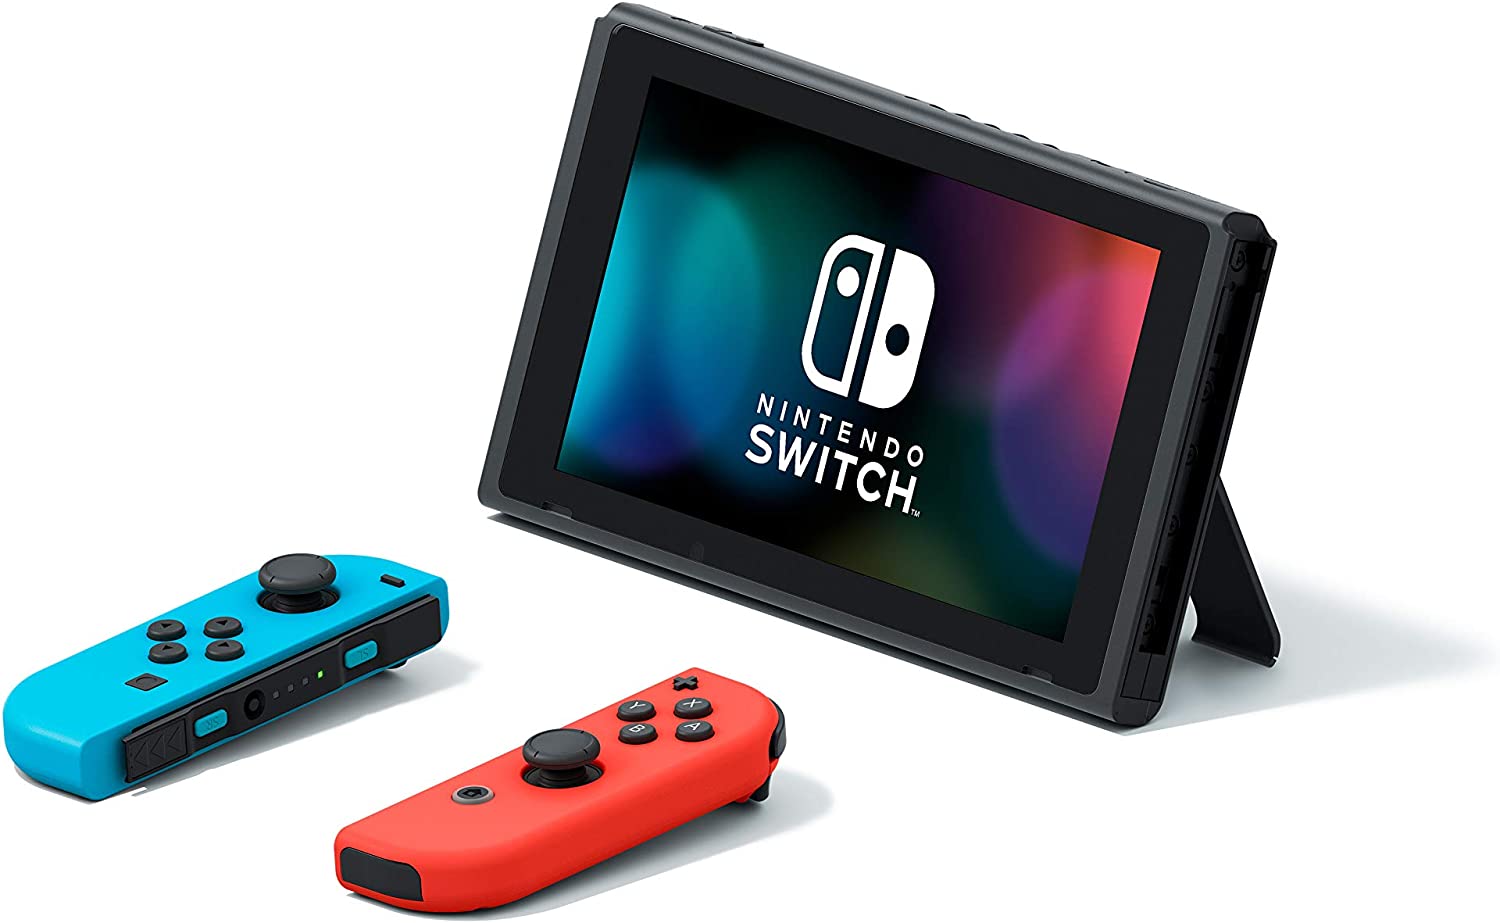 Nintendo Switch Neon Console & Select Game